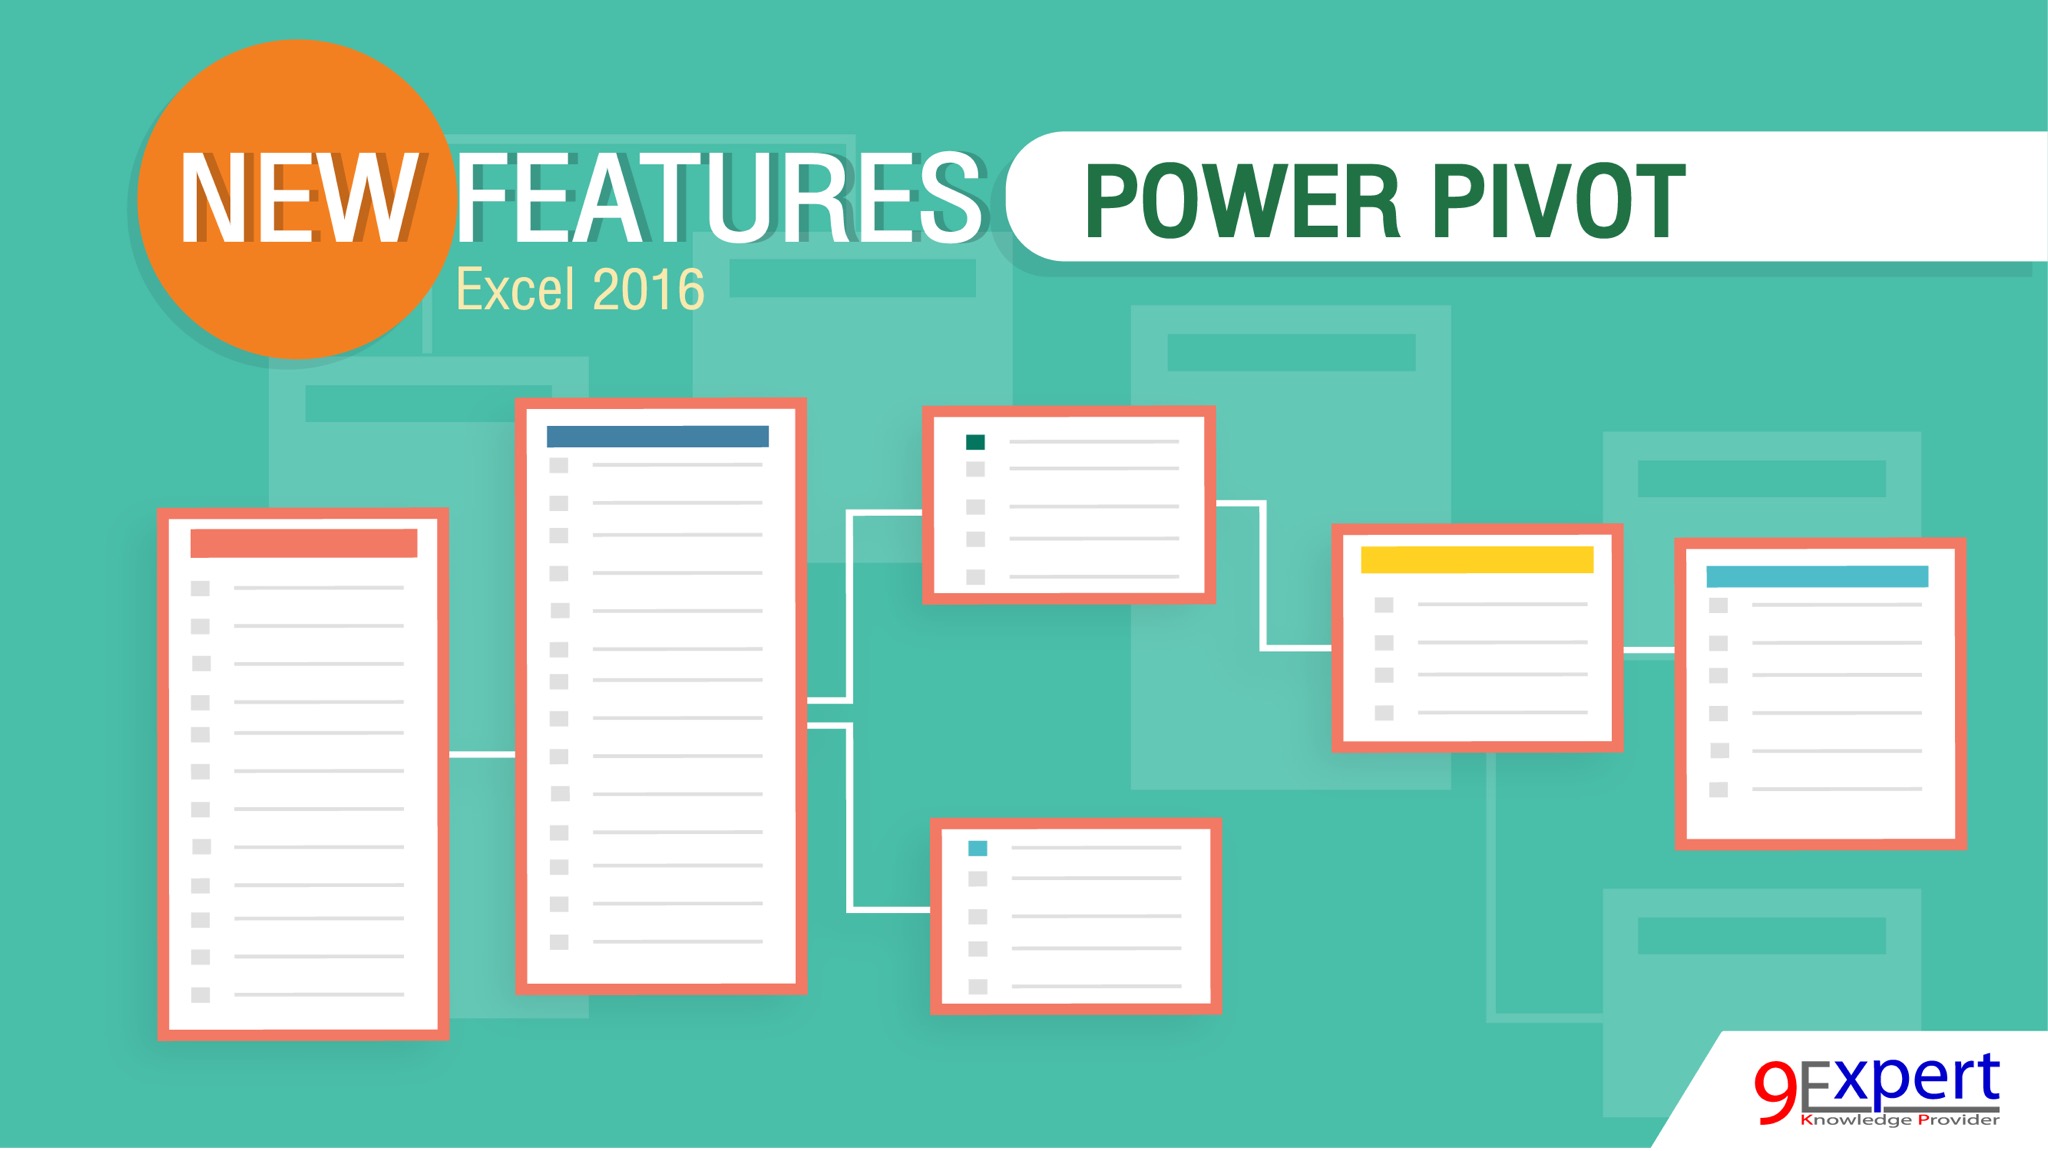 Microsoft-excel-new-features-power-pivot